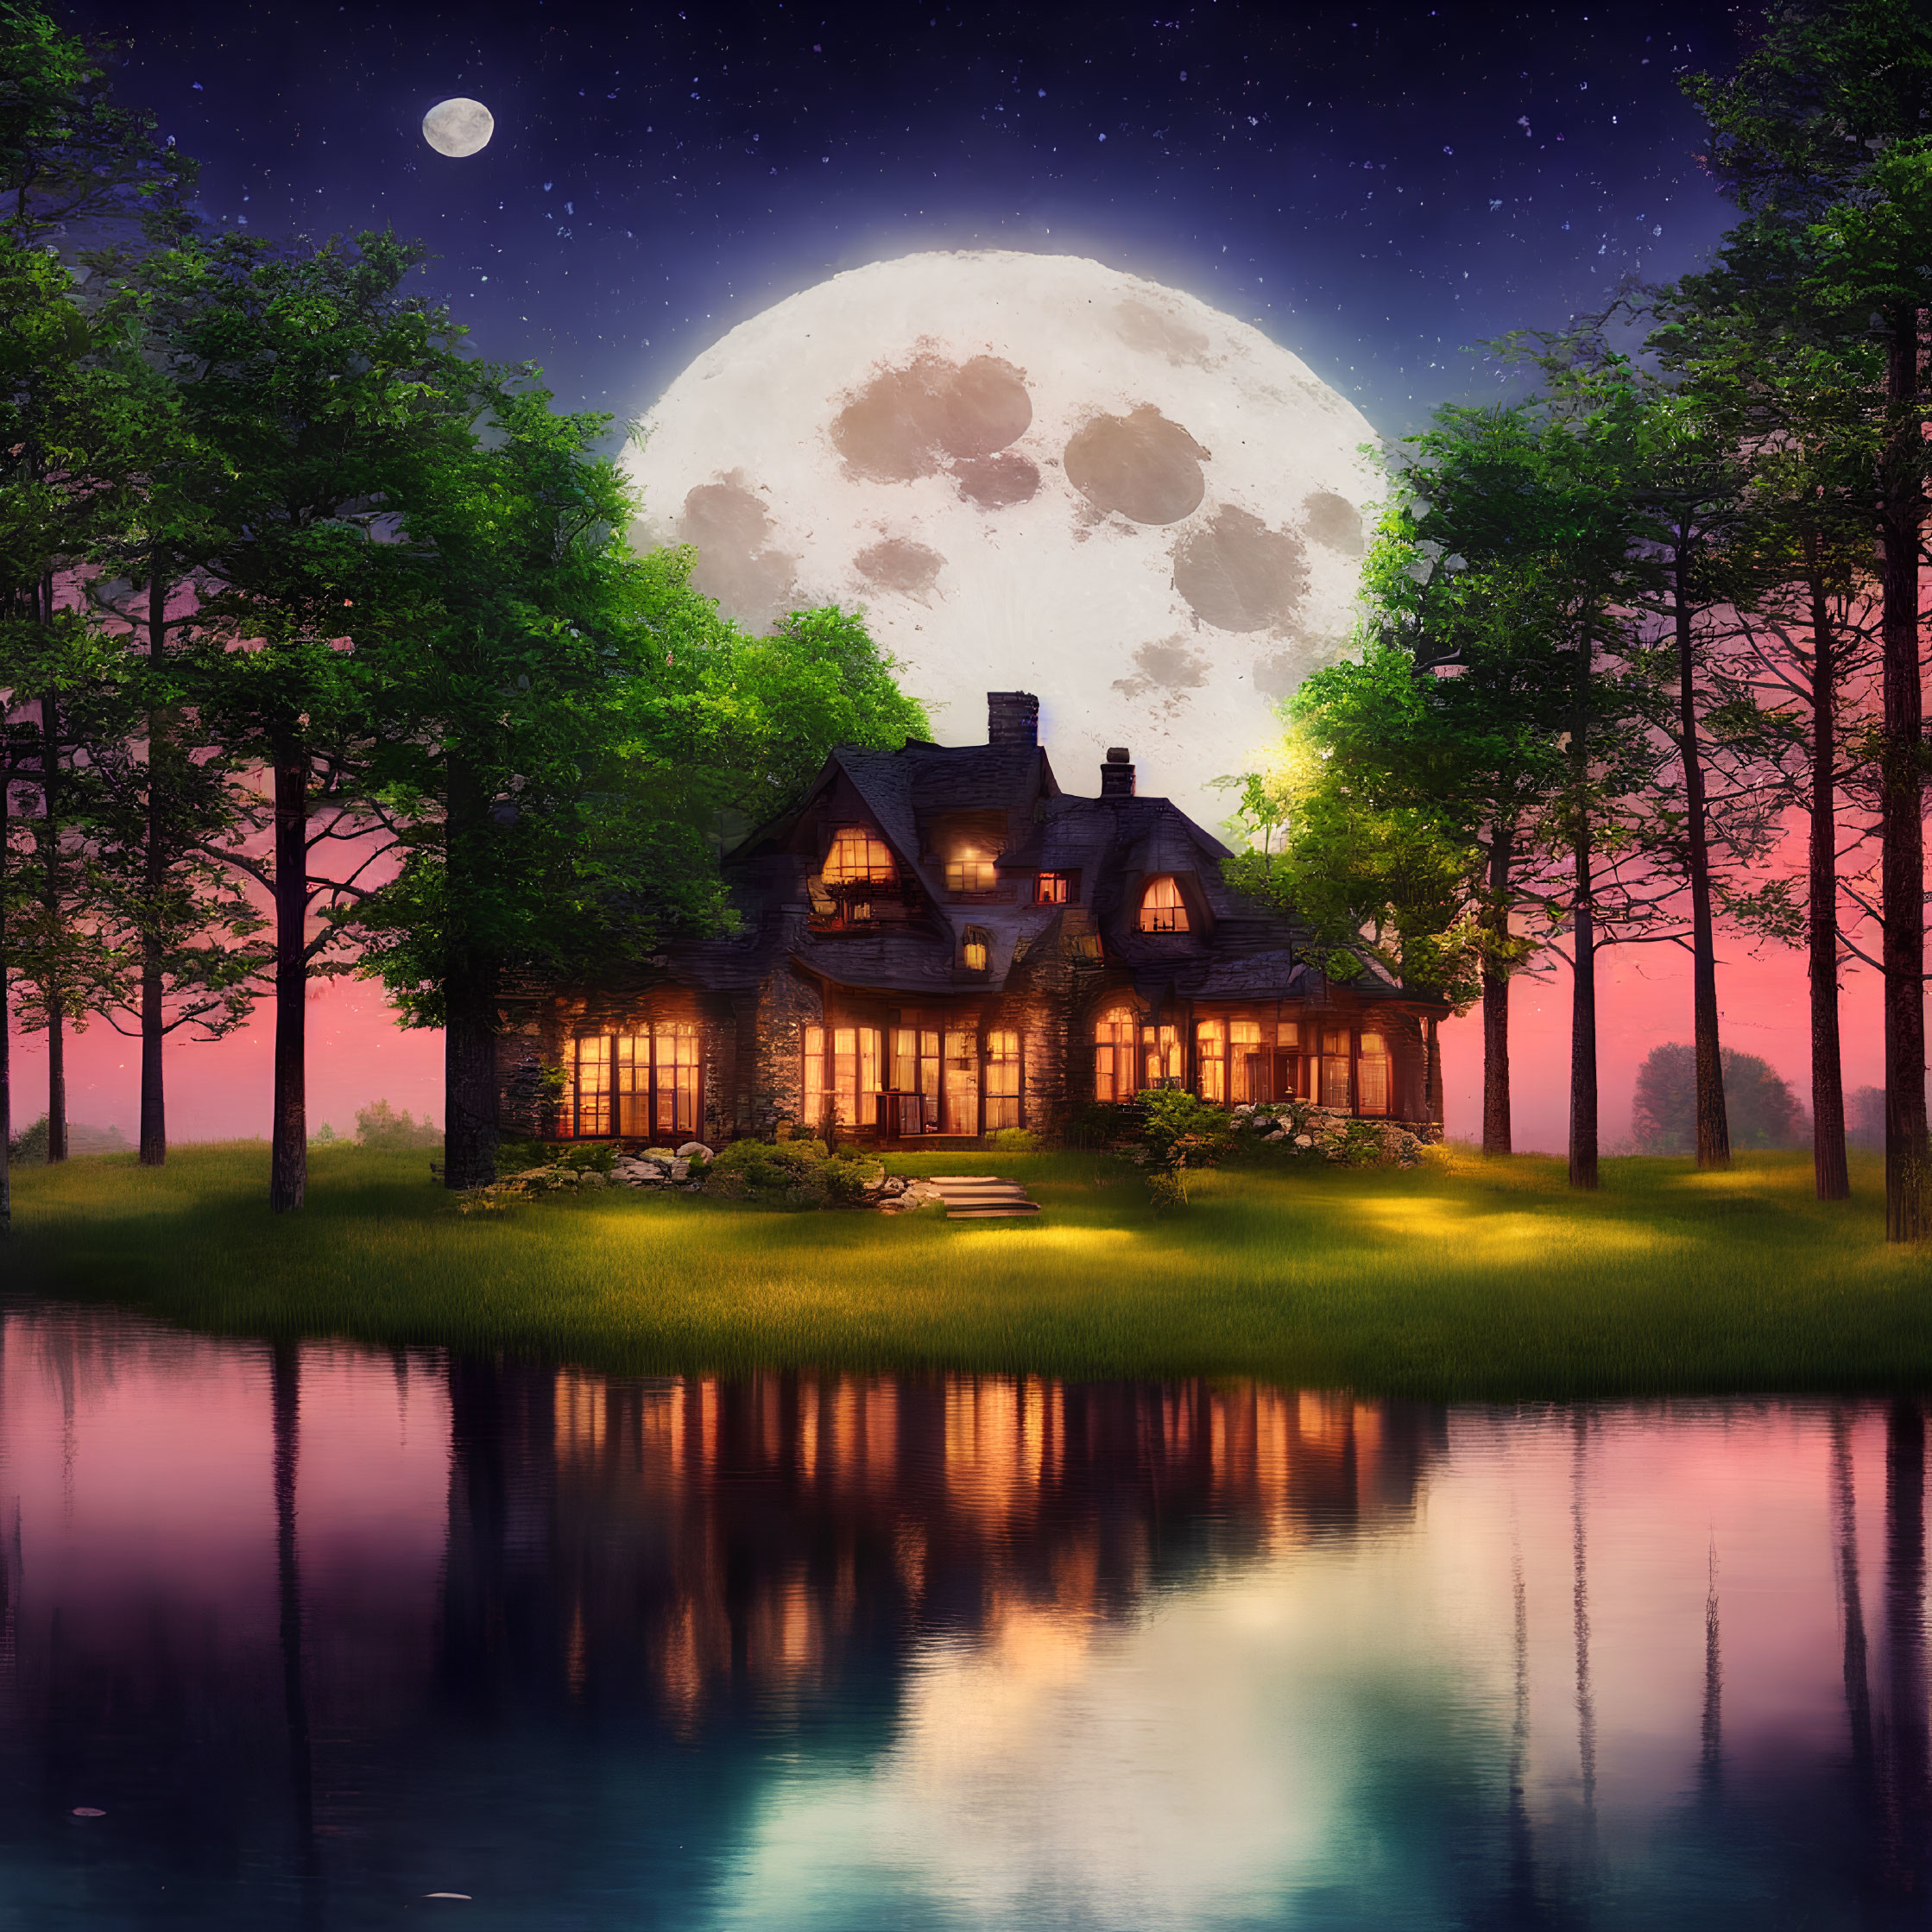 Cozy house by lake under starry sky with full moon